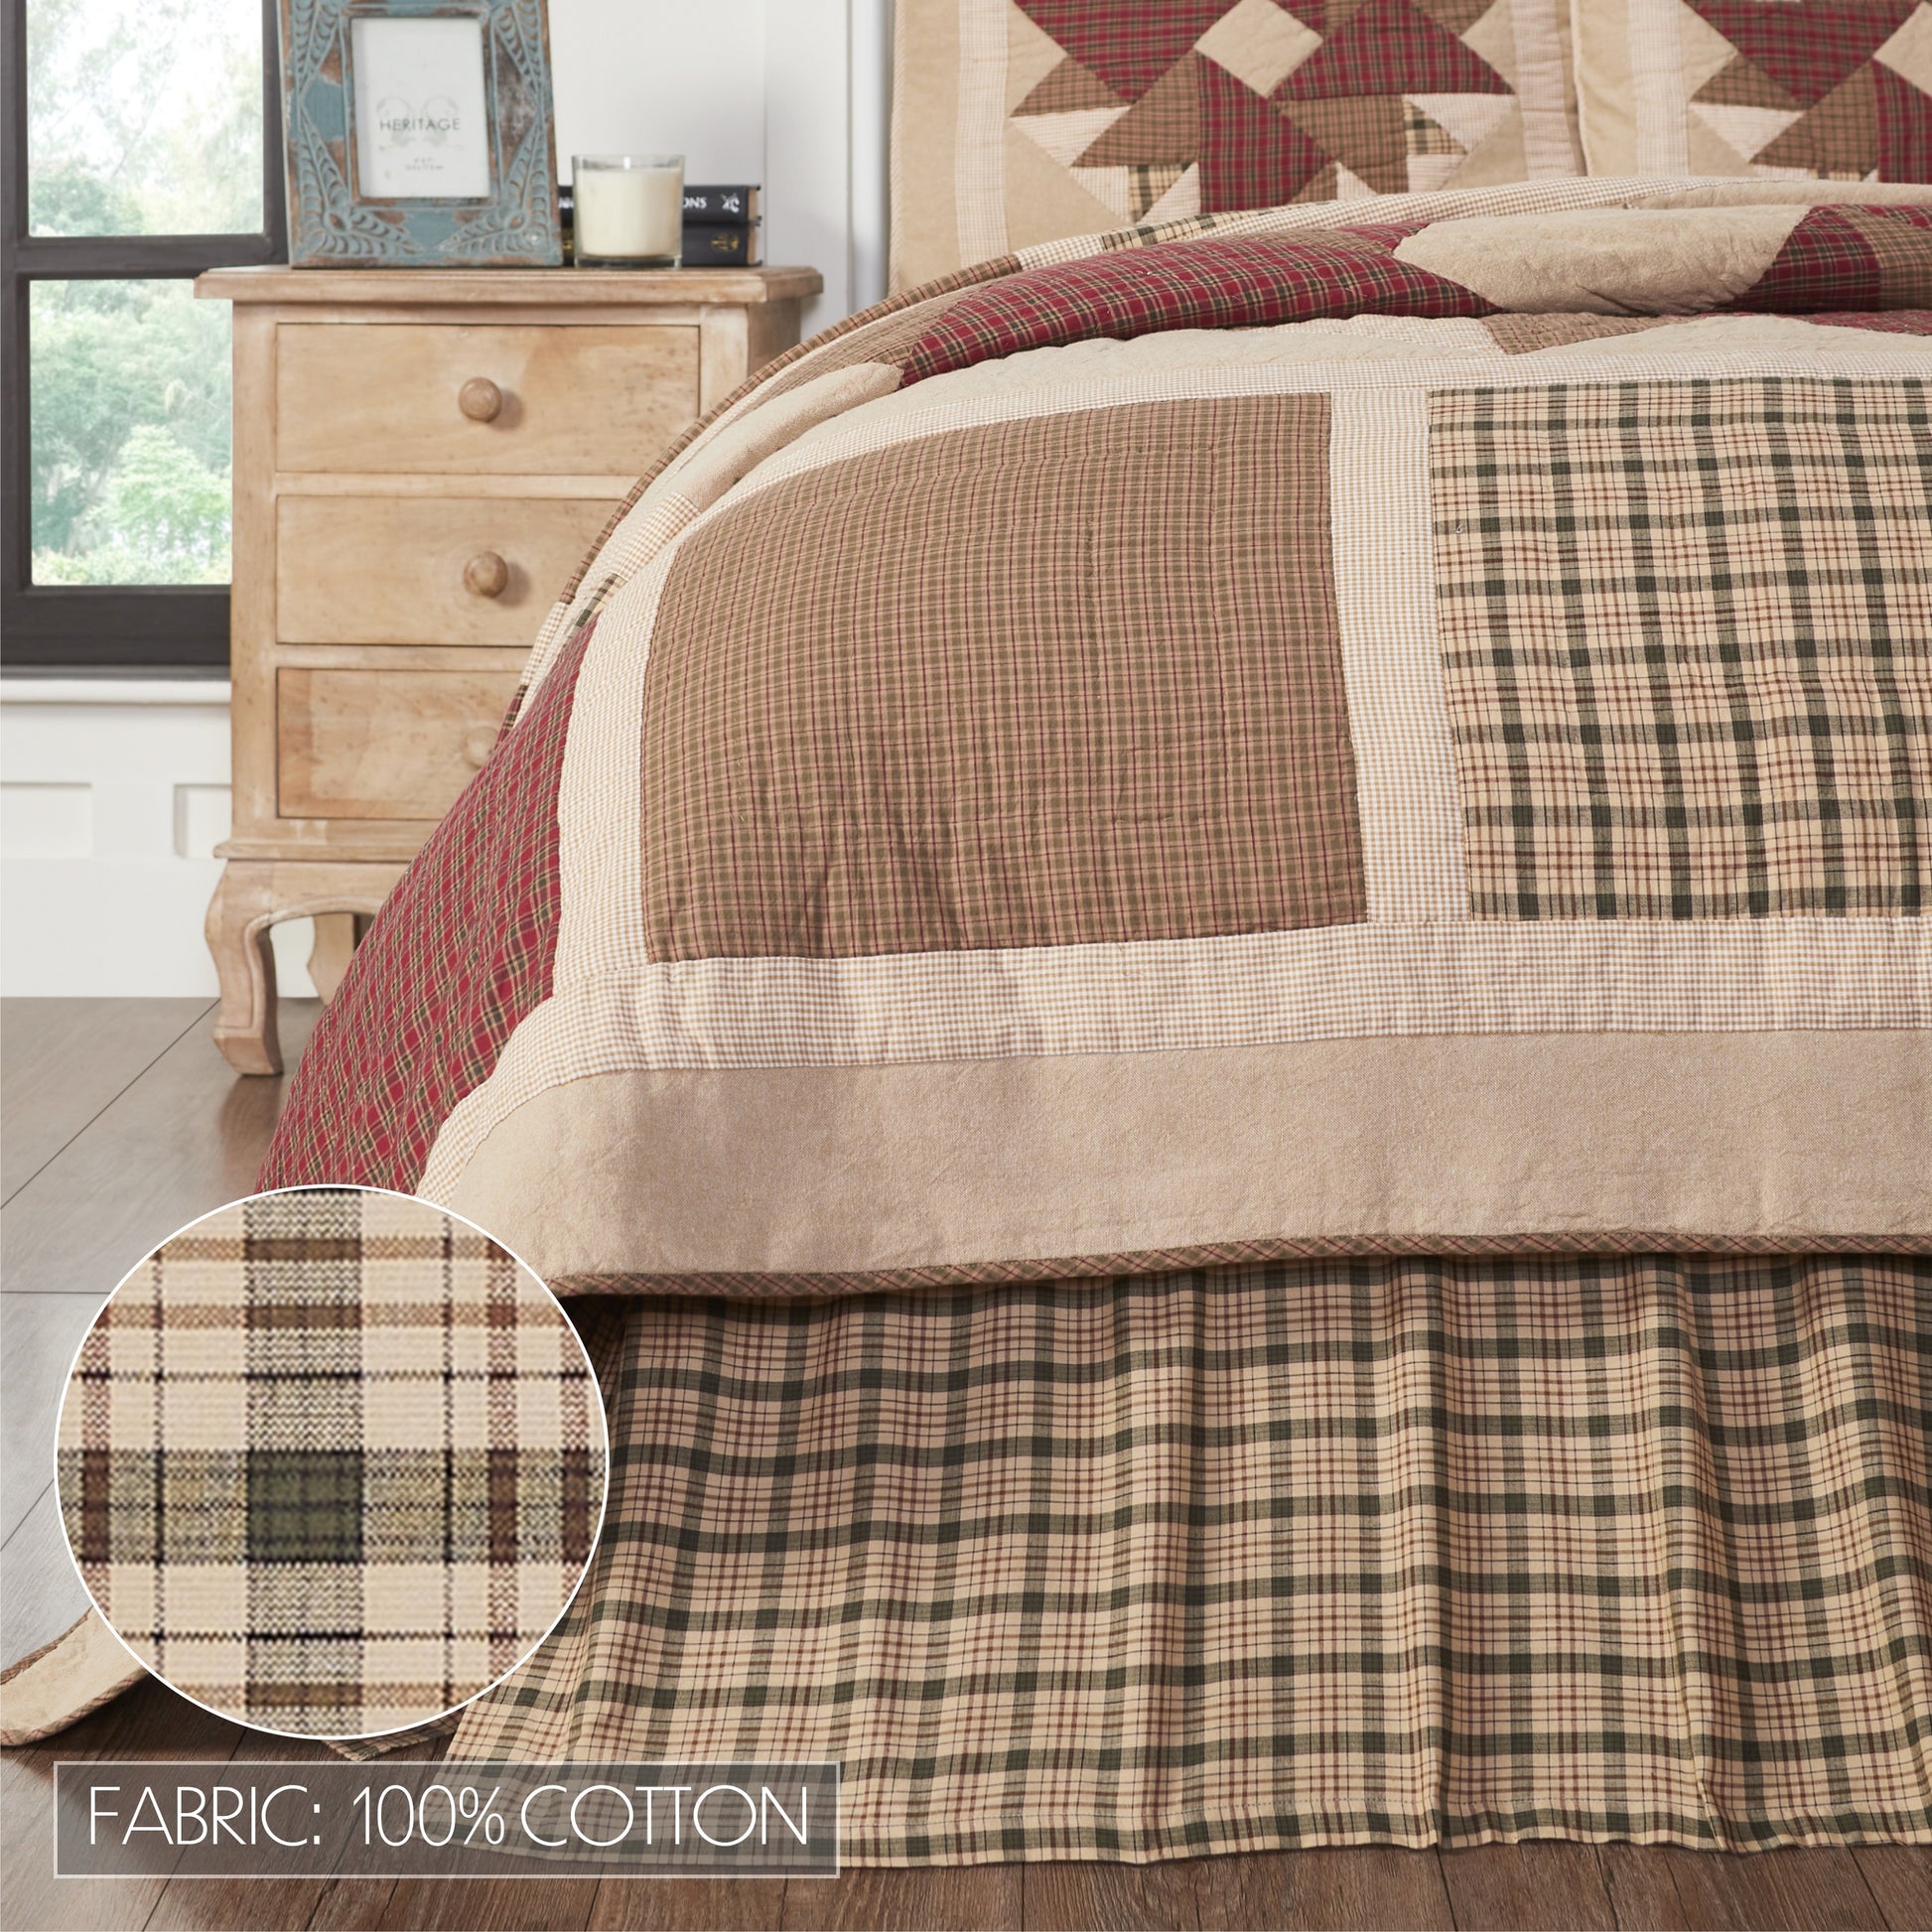 80317-Cider-Mill-King-Bed-Skirt-78x80x16-image-4